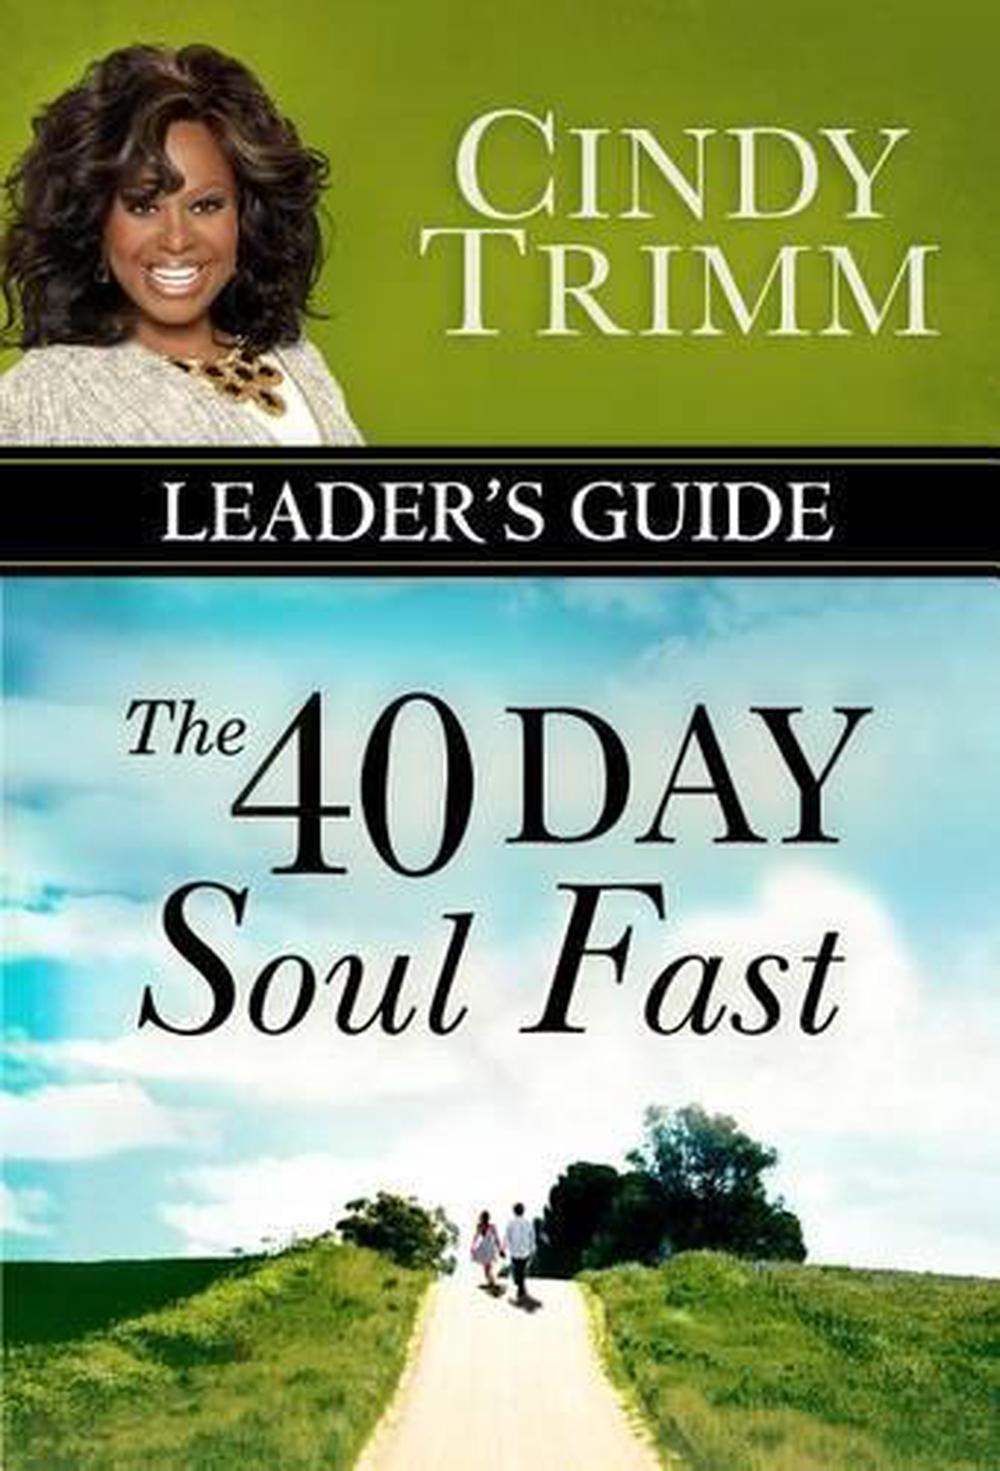 The 40 Day Soul Fast Leader's Guide by Cindy Trimm, Paperback